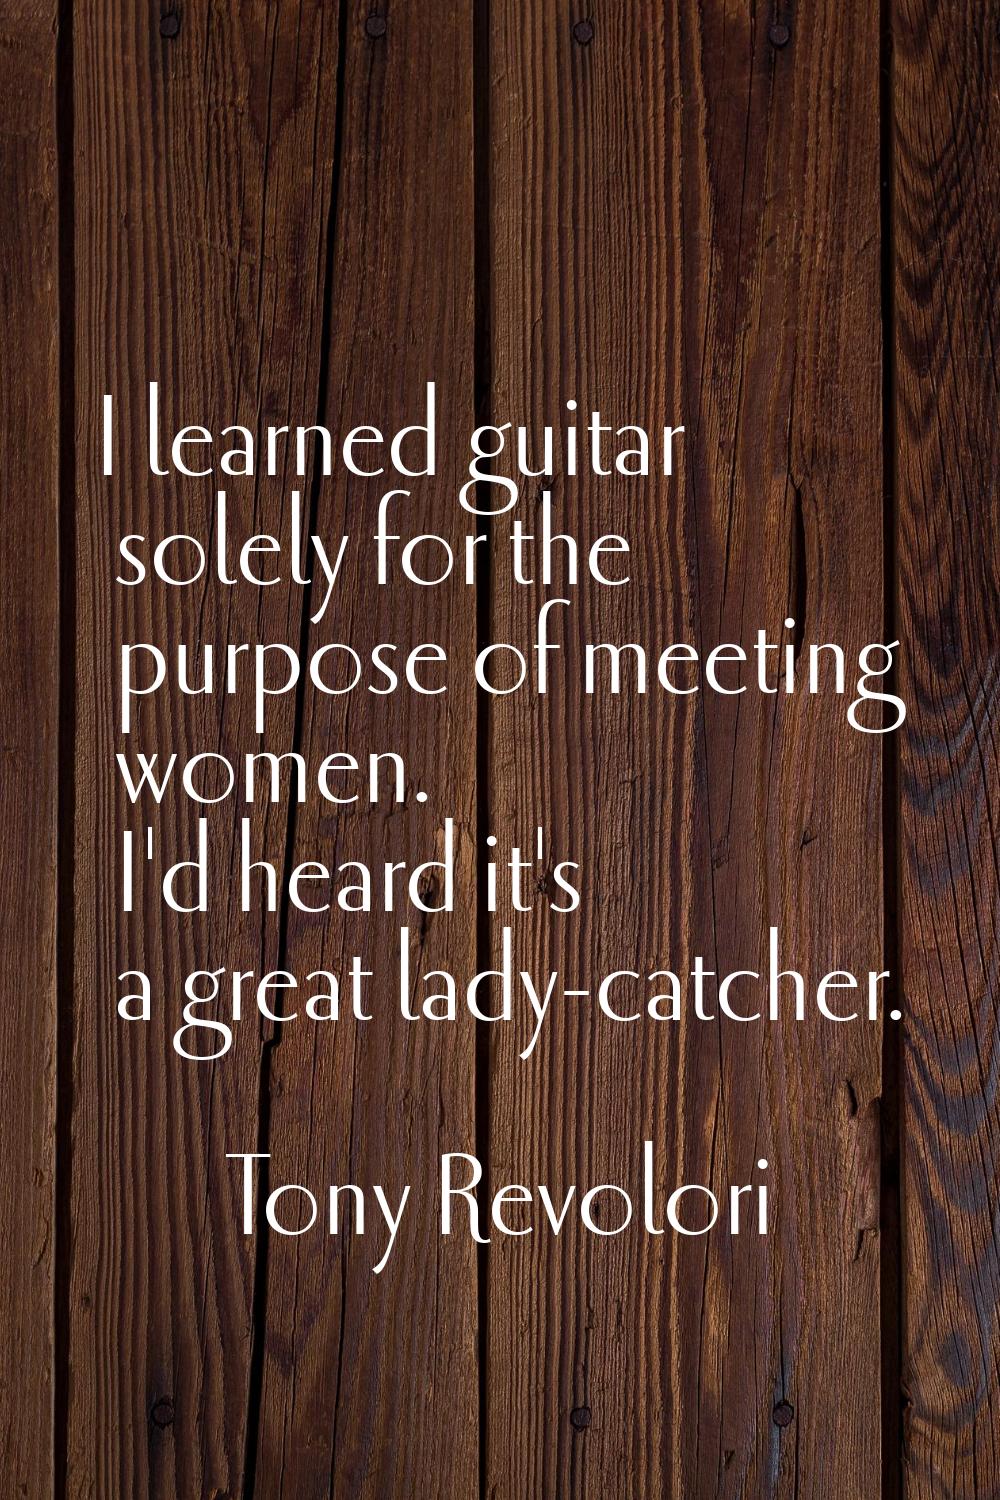 I learned guitar solely for the purpose of meeting women. I'd heard it's a great lady-catcher.